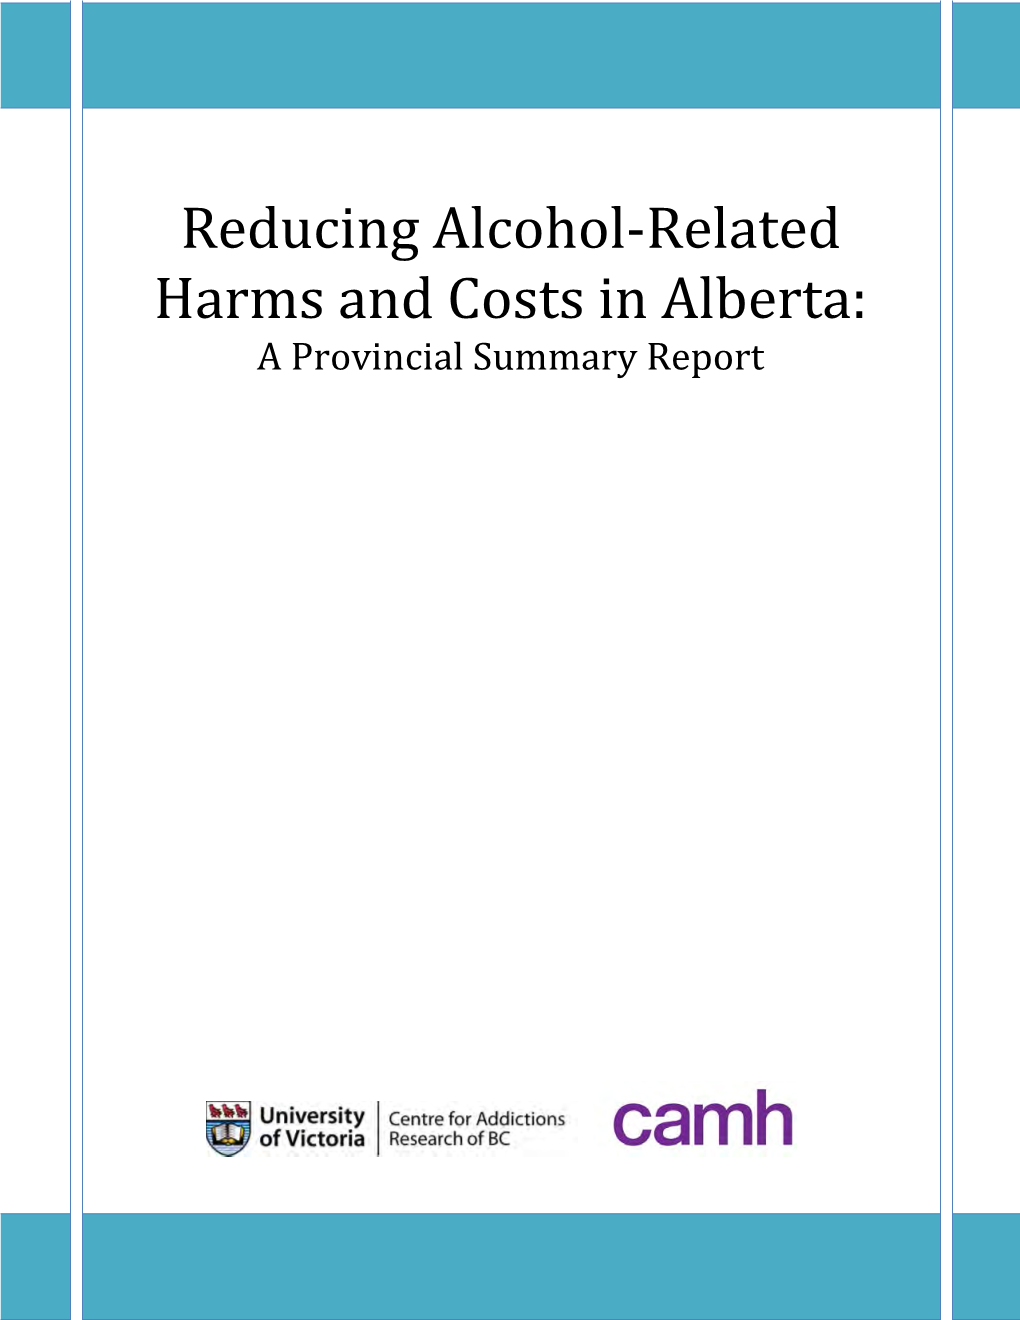 Reducing Alcohol-Related Harms and Costs in Alberta: a Provincial Summary Report